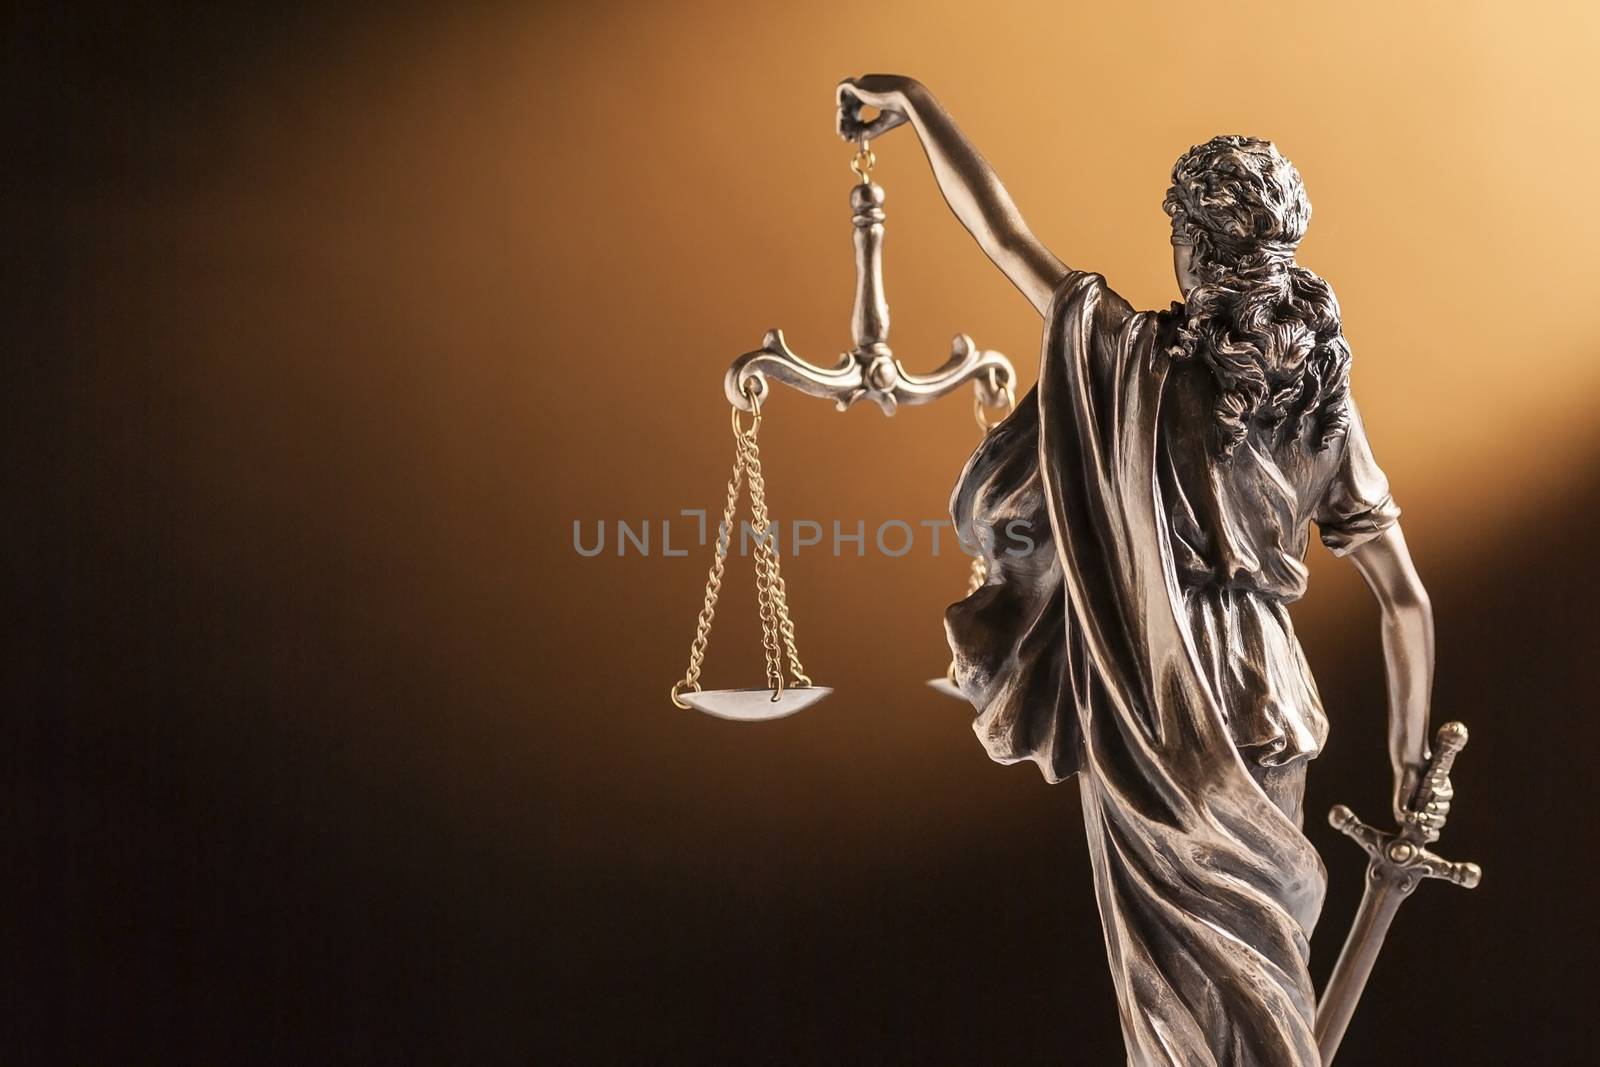 Rear view of of a small bronze figurine of Justice holding up the scales of law and order and carrying a sword facing towards blank copy space on brown